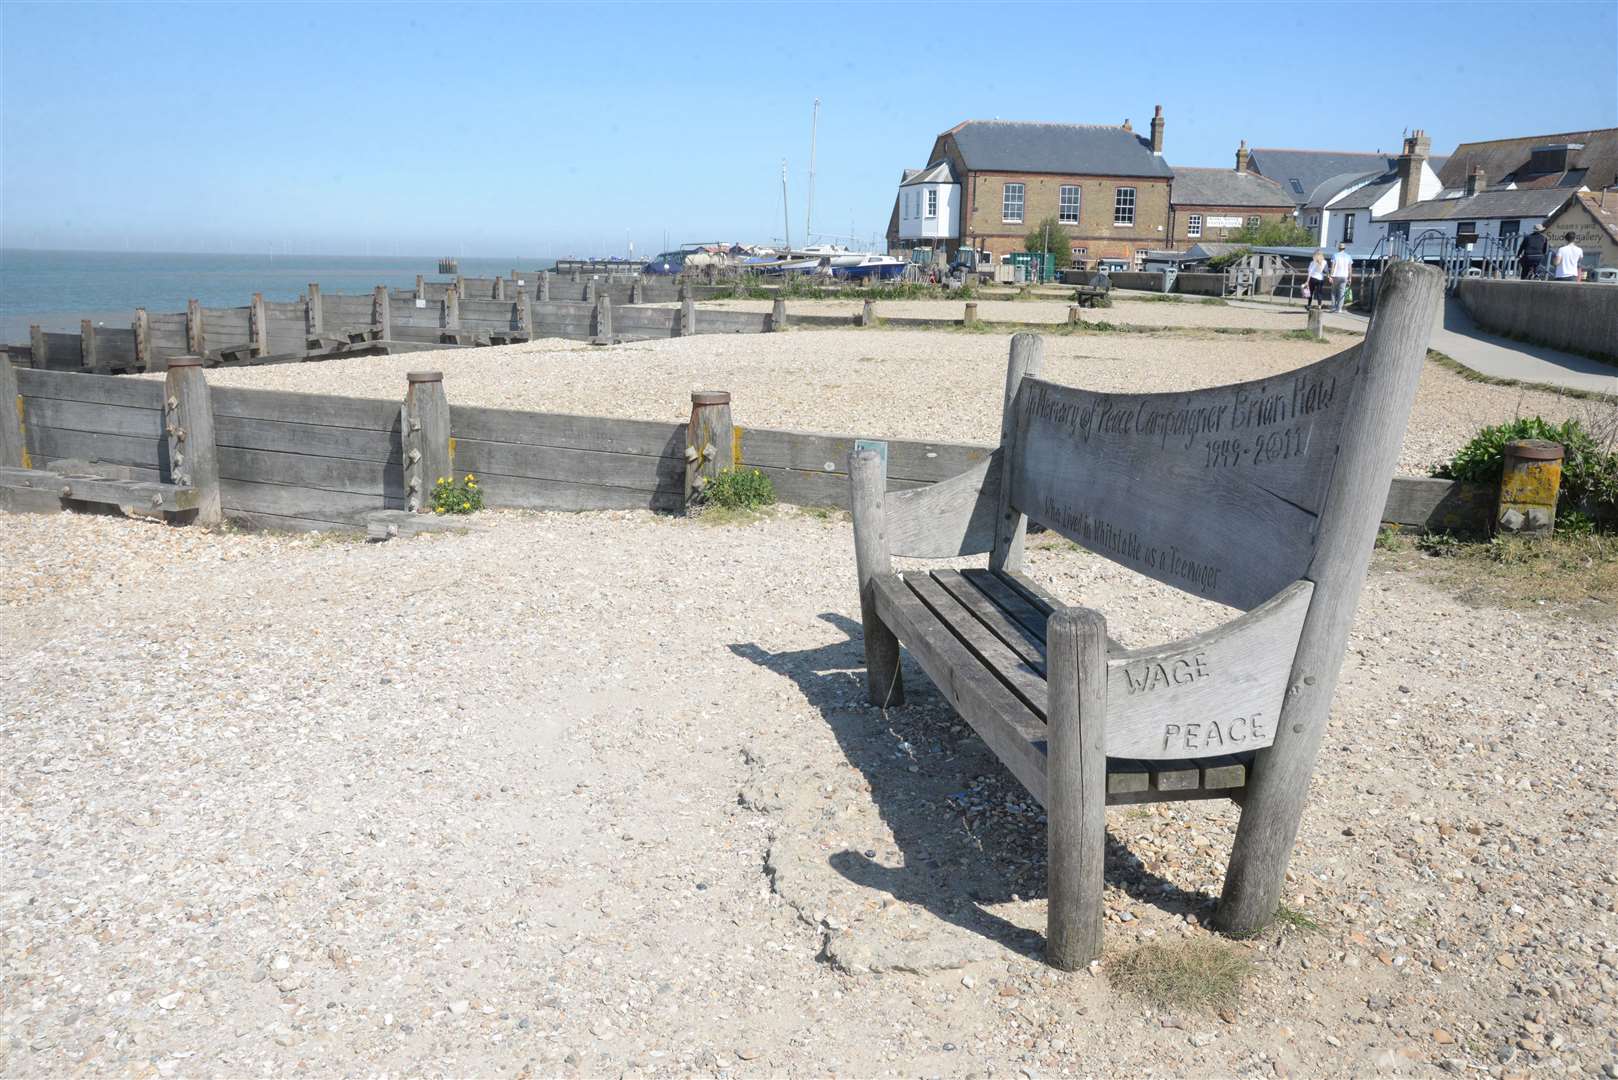 West Beach in Whitstable is owned by the Whitstable Oyster Fishery Company